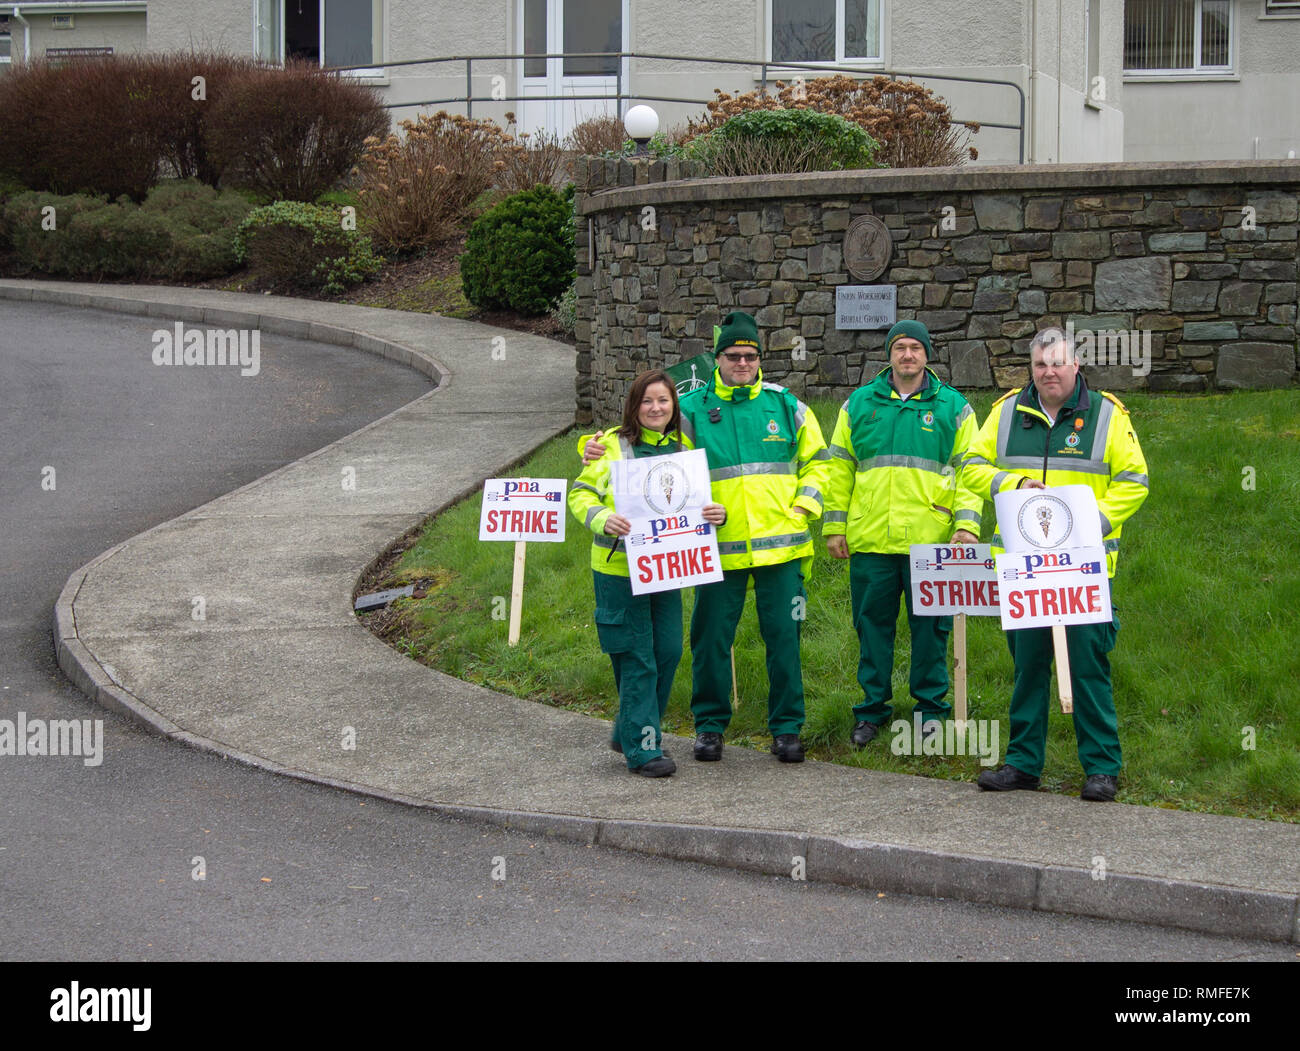 Skibbereen, West Cork, Ireland. 15th Feb 2019. PNA Strike picket line, Skibbereen, West Cork, Ireland, February 12th 2019 Ambulance personnel belonging to the Psychiatric Nurses Association (PNA) were out manning the picket line outside Skibbereen Community Hospital today as part of their nationwide industrial action. Credit: aphperspective/Alamy Live News Stock Photo